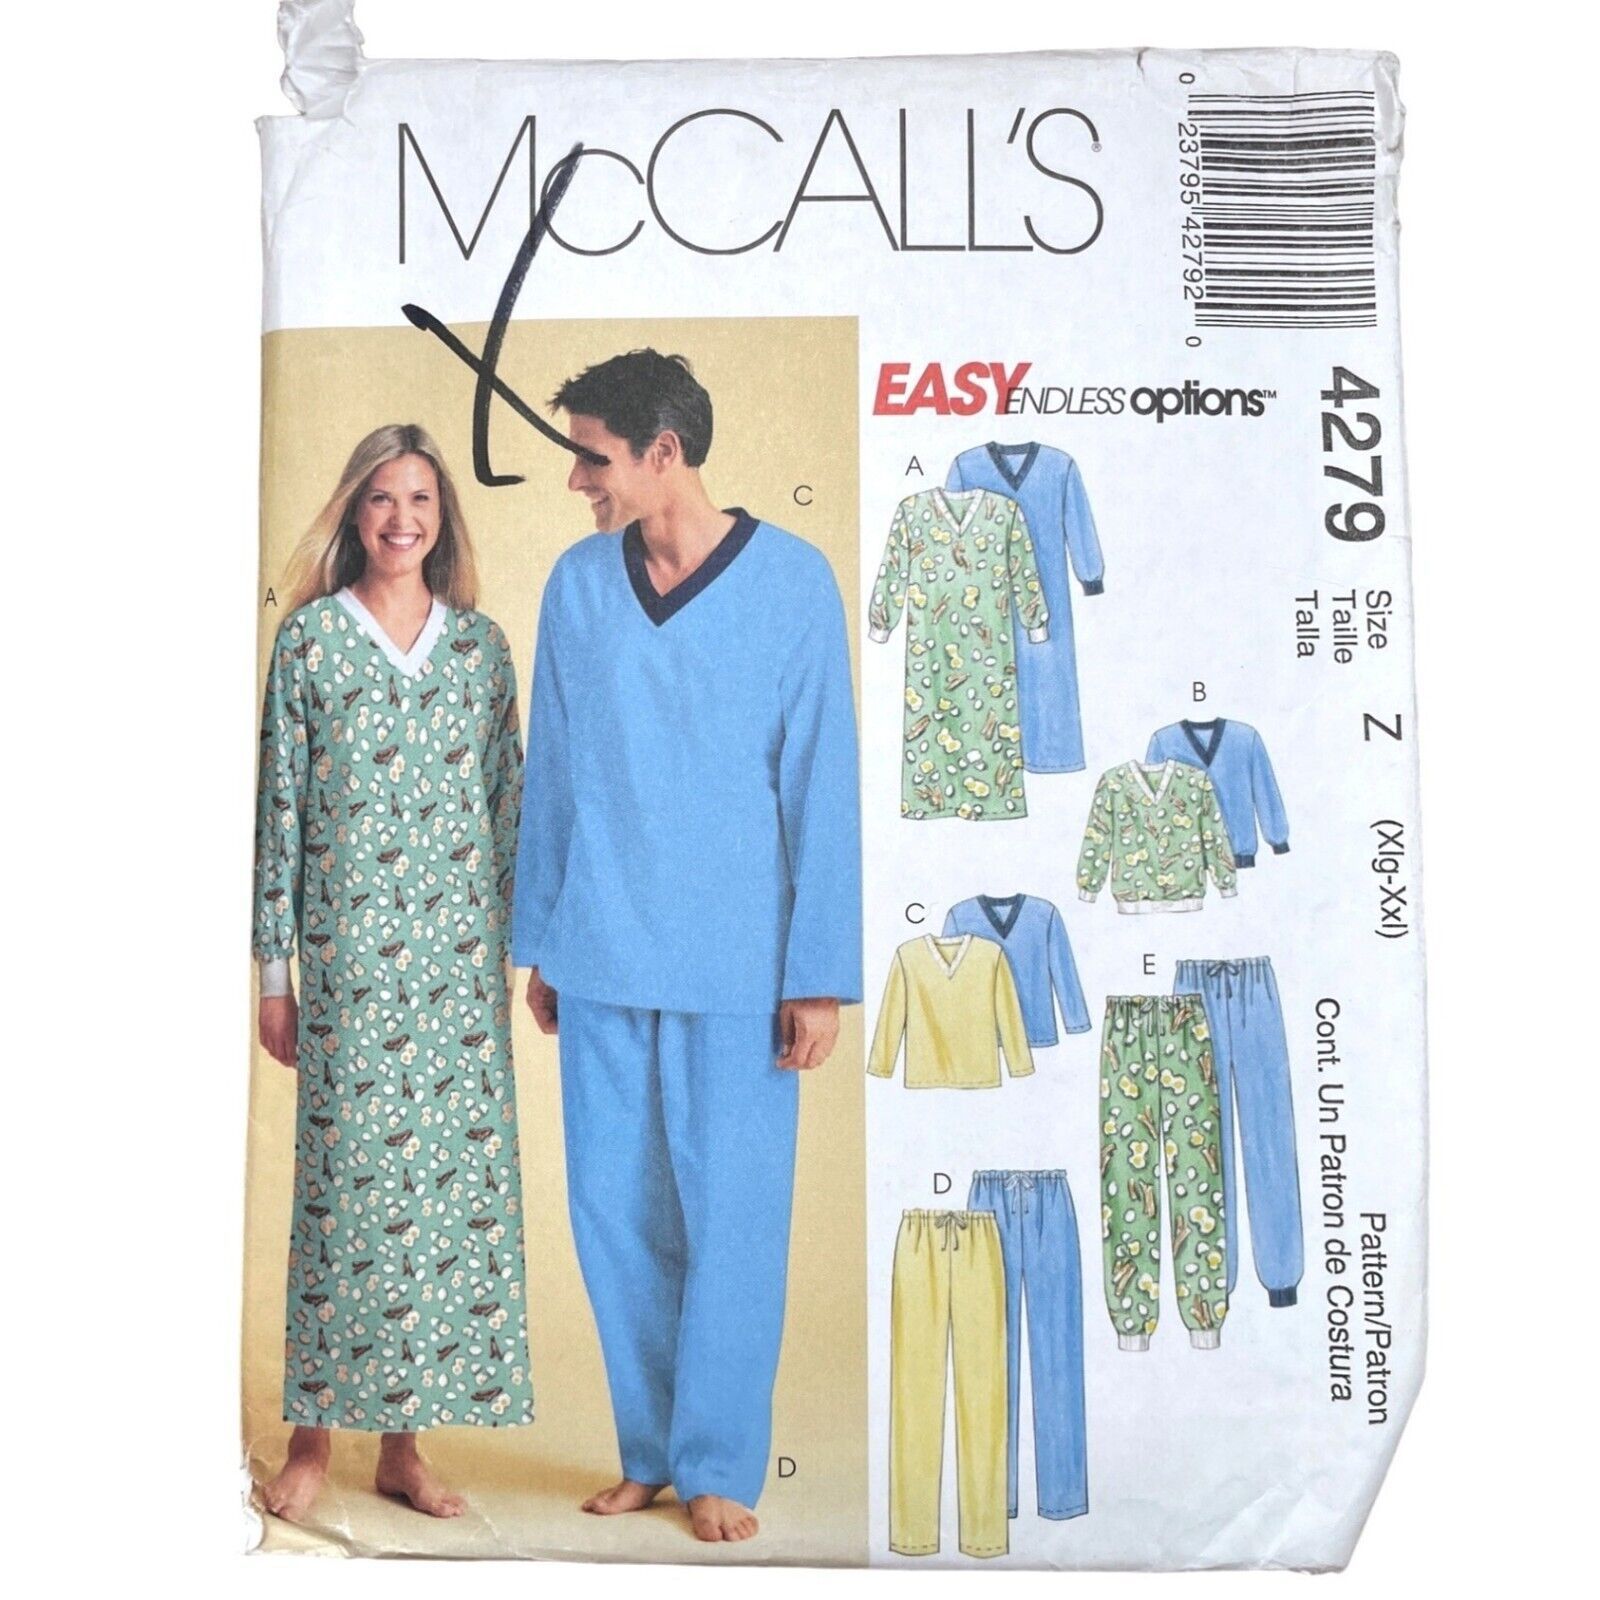 McCalls Sewing Pattern 4279 Nightshirt Top Pants Gown Unisex Teen Adult XL-XXL - $8.99